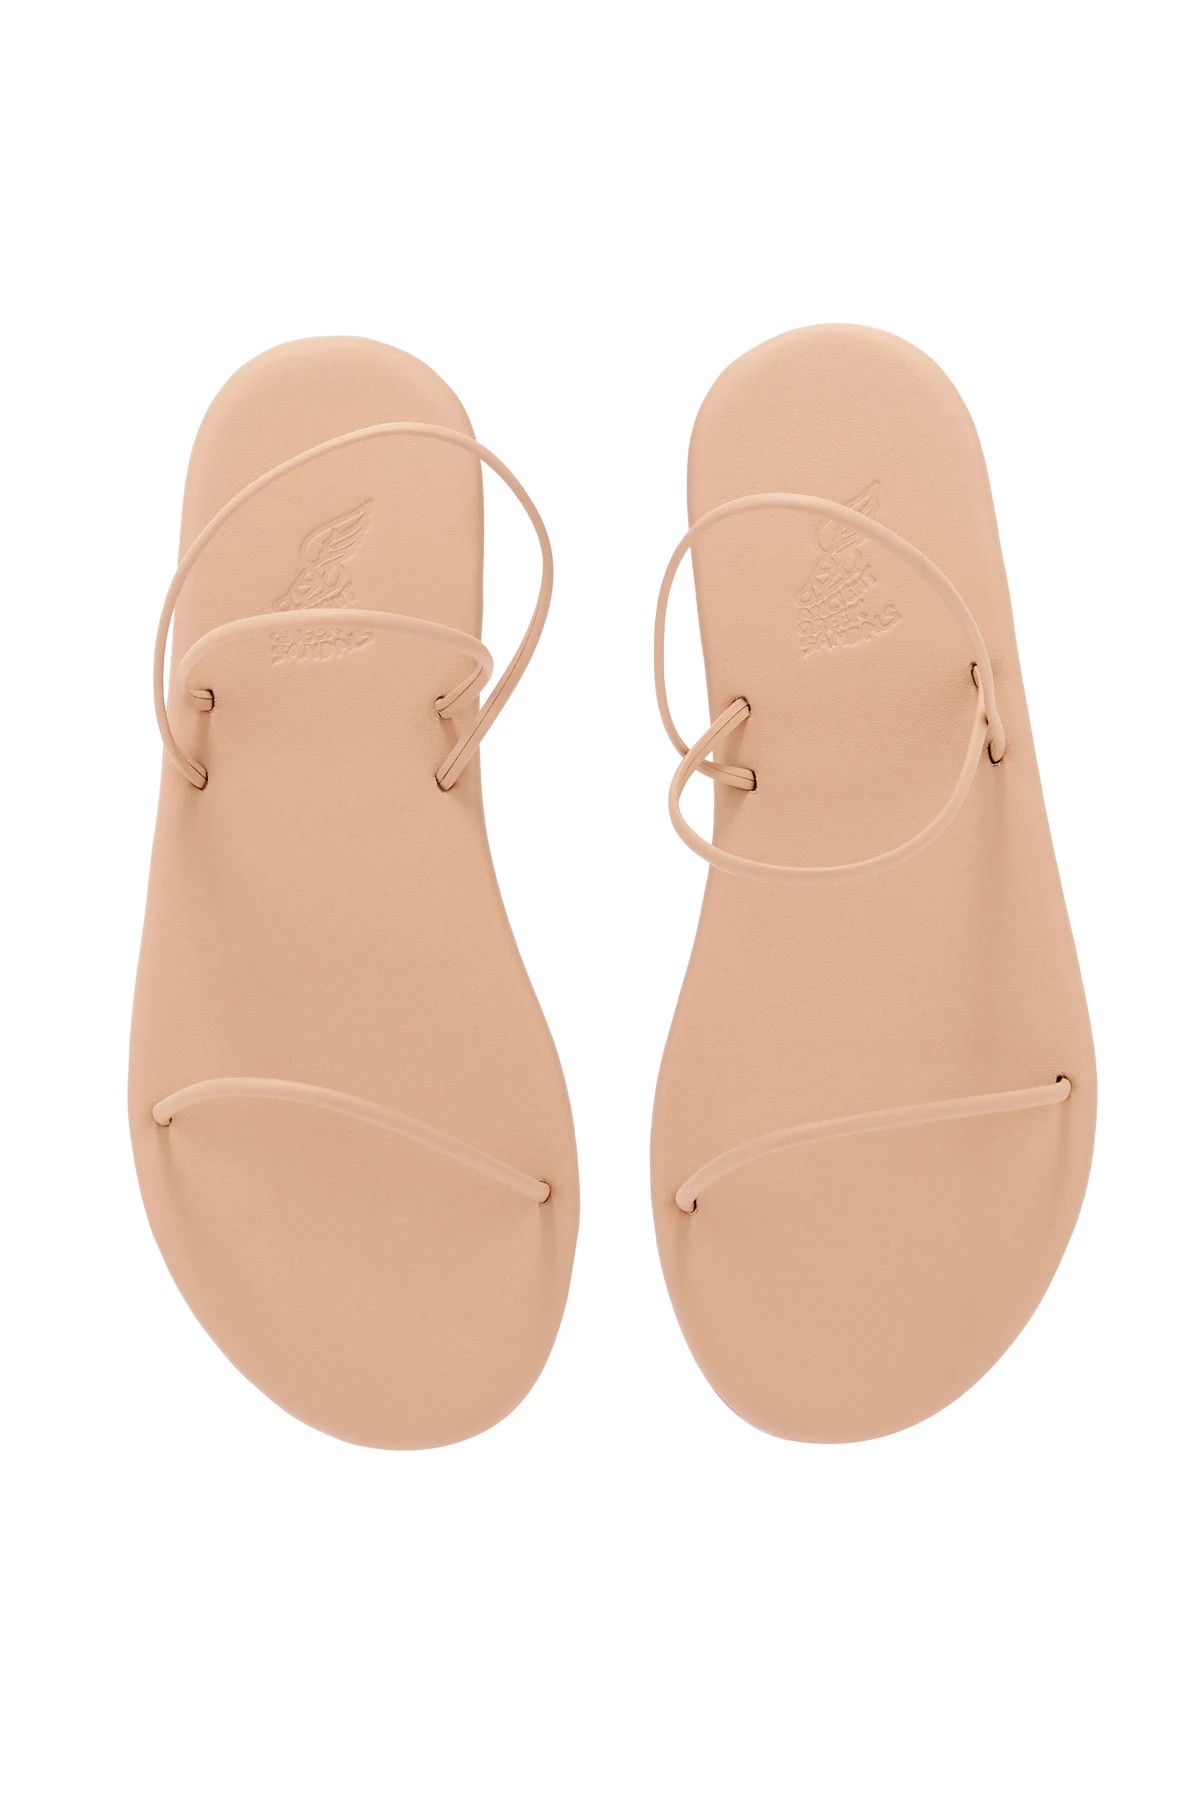 Polytimi Sandals | Everything But Water